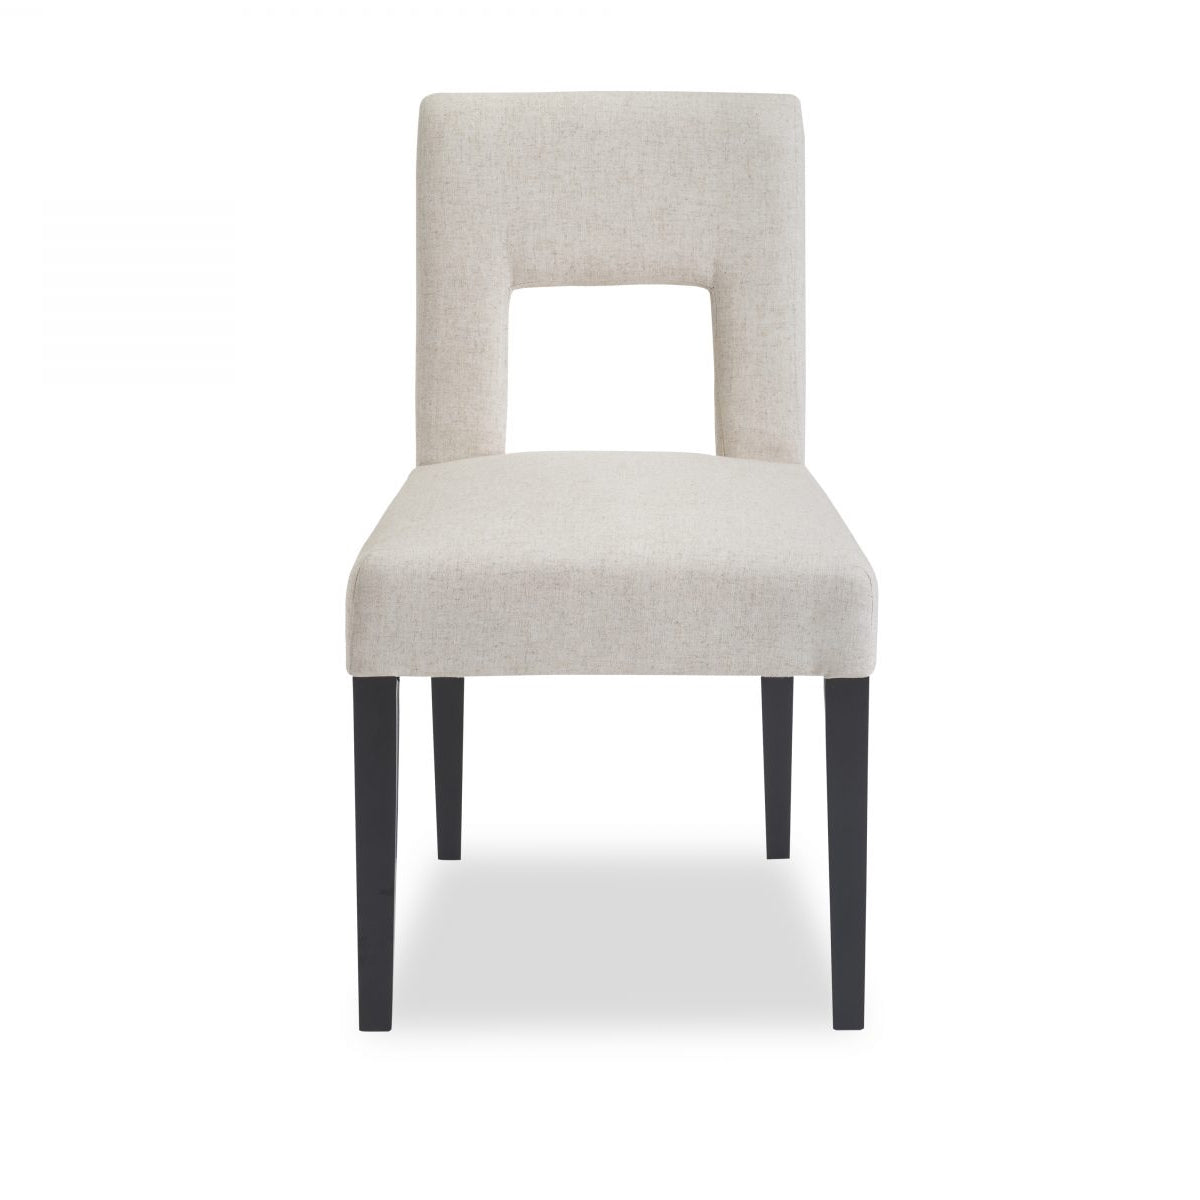 Liang & Eimil Venice Dining Chair in Sand Linen